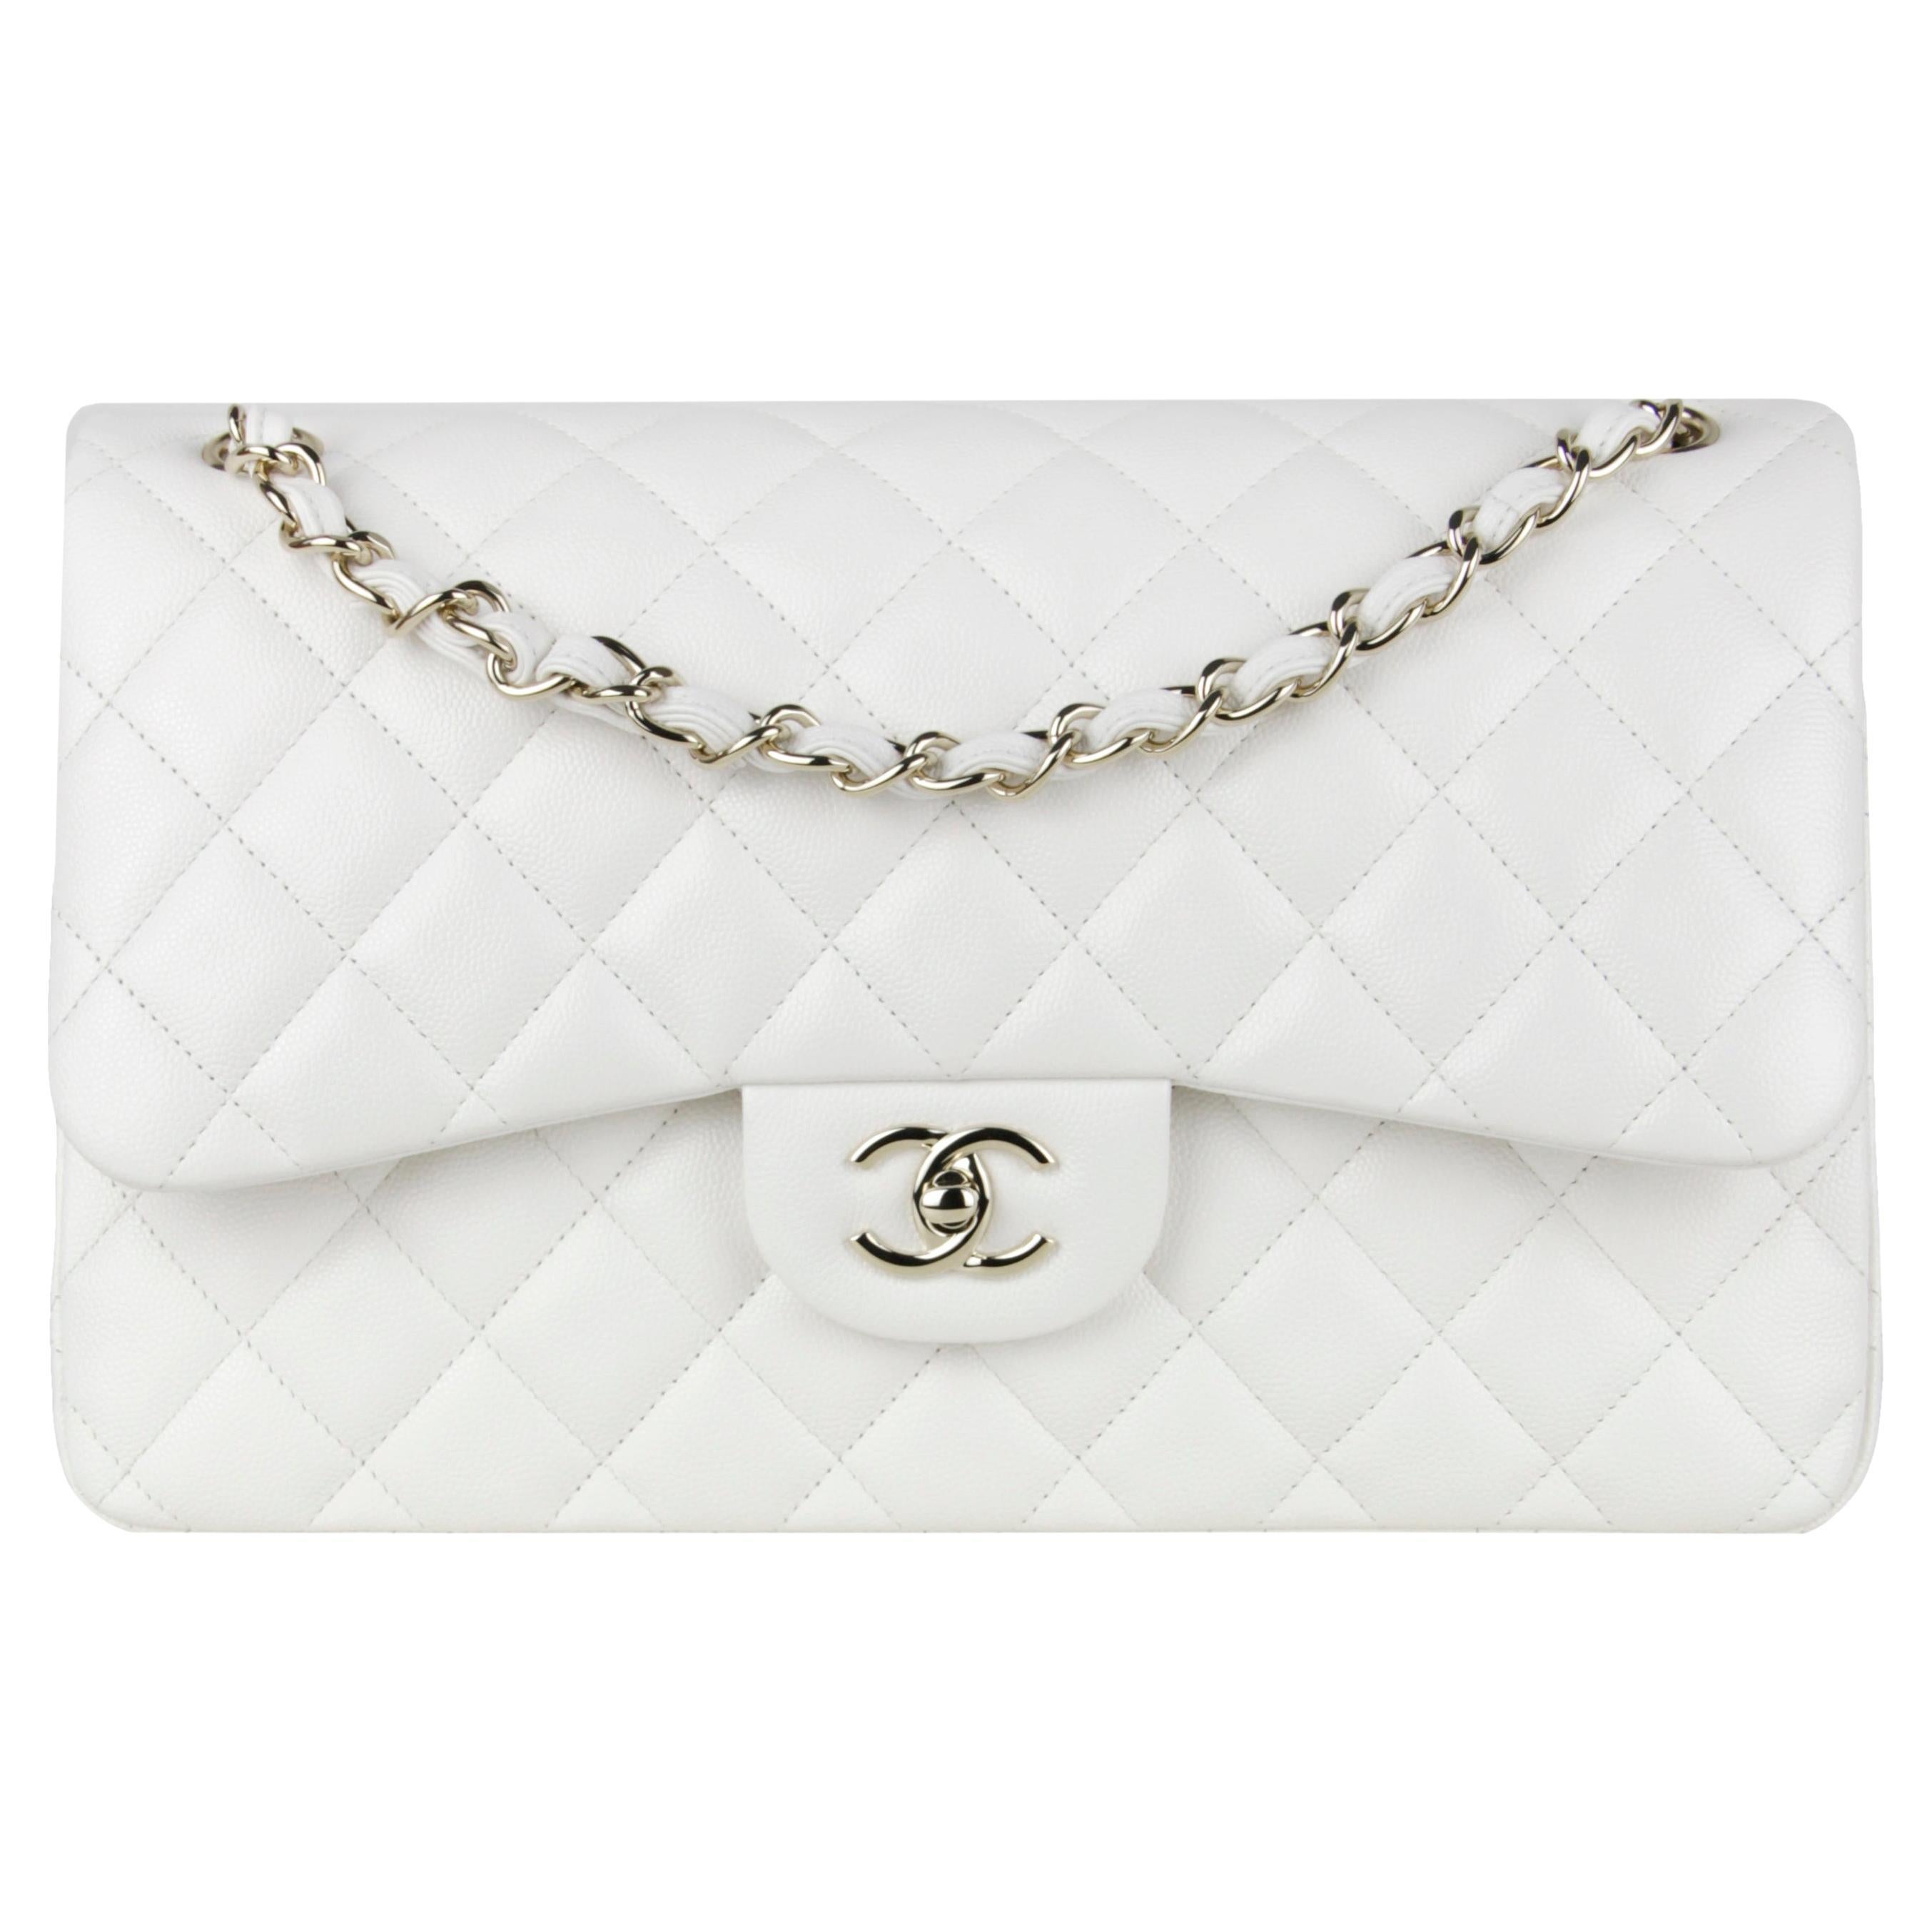 Chanel LIKE NEW White Caviar Leather Quilted Classic Double Flap